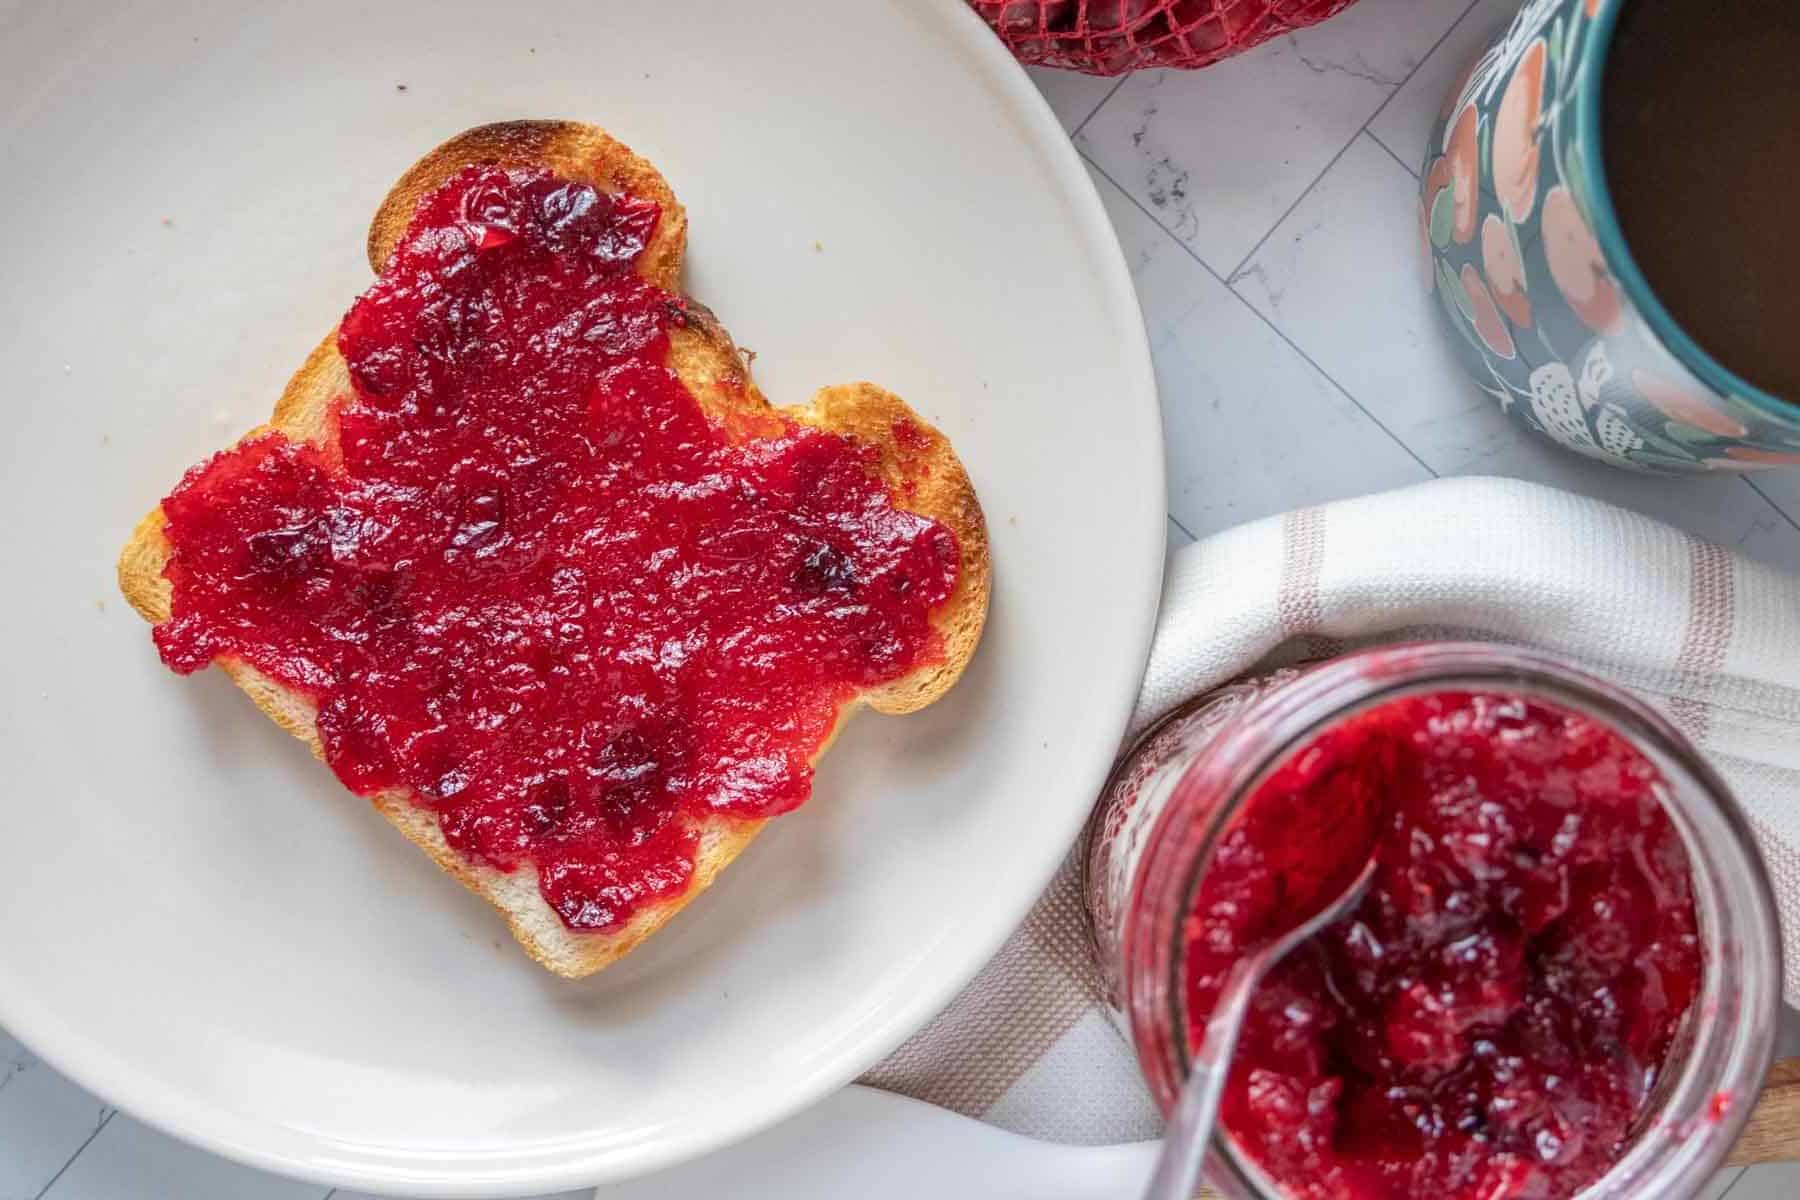 Cranberry jam on toast with a cup of coffee.